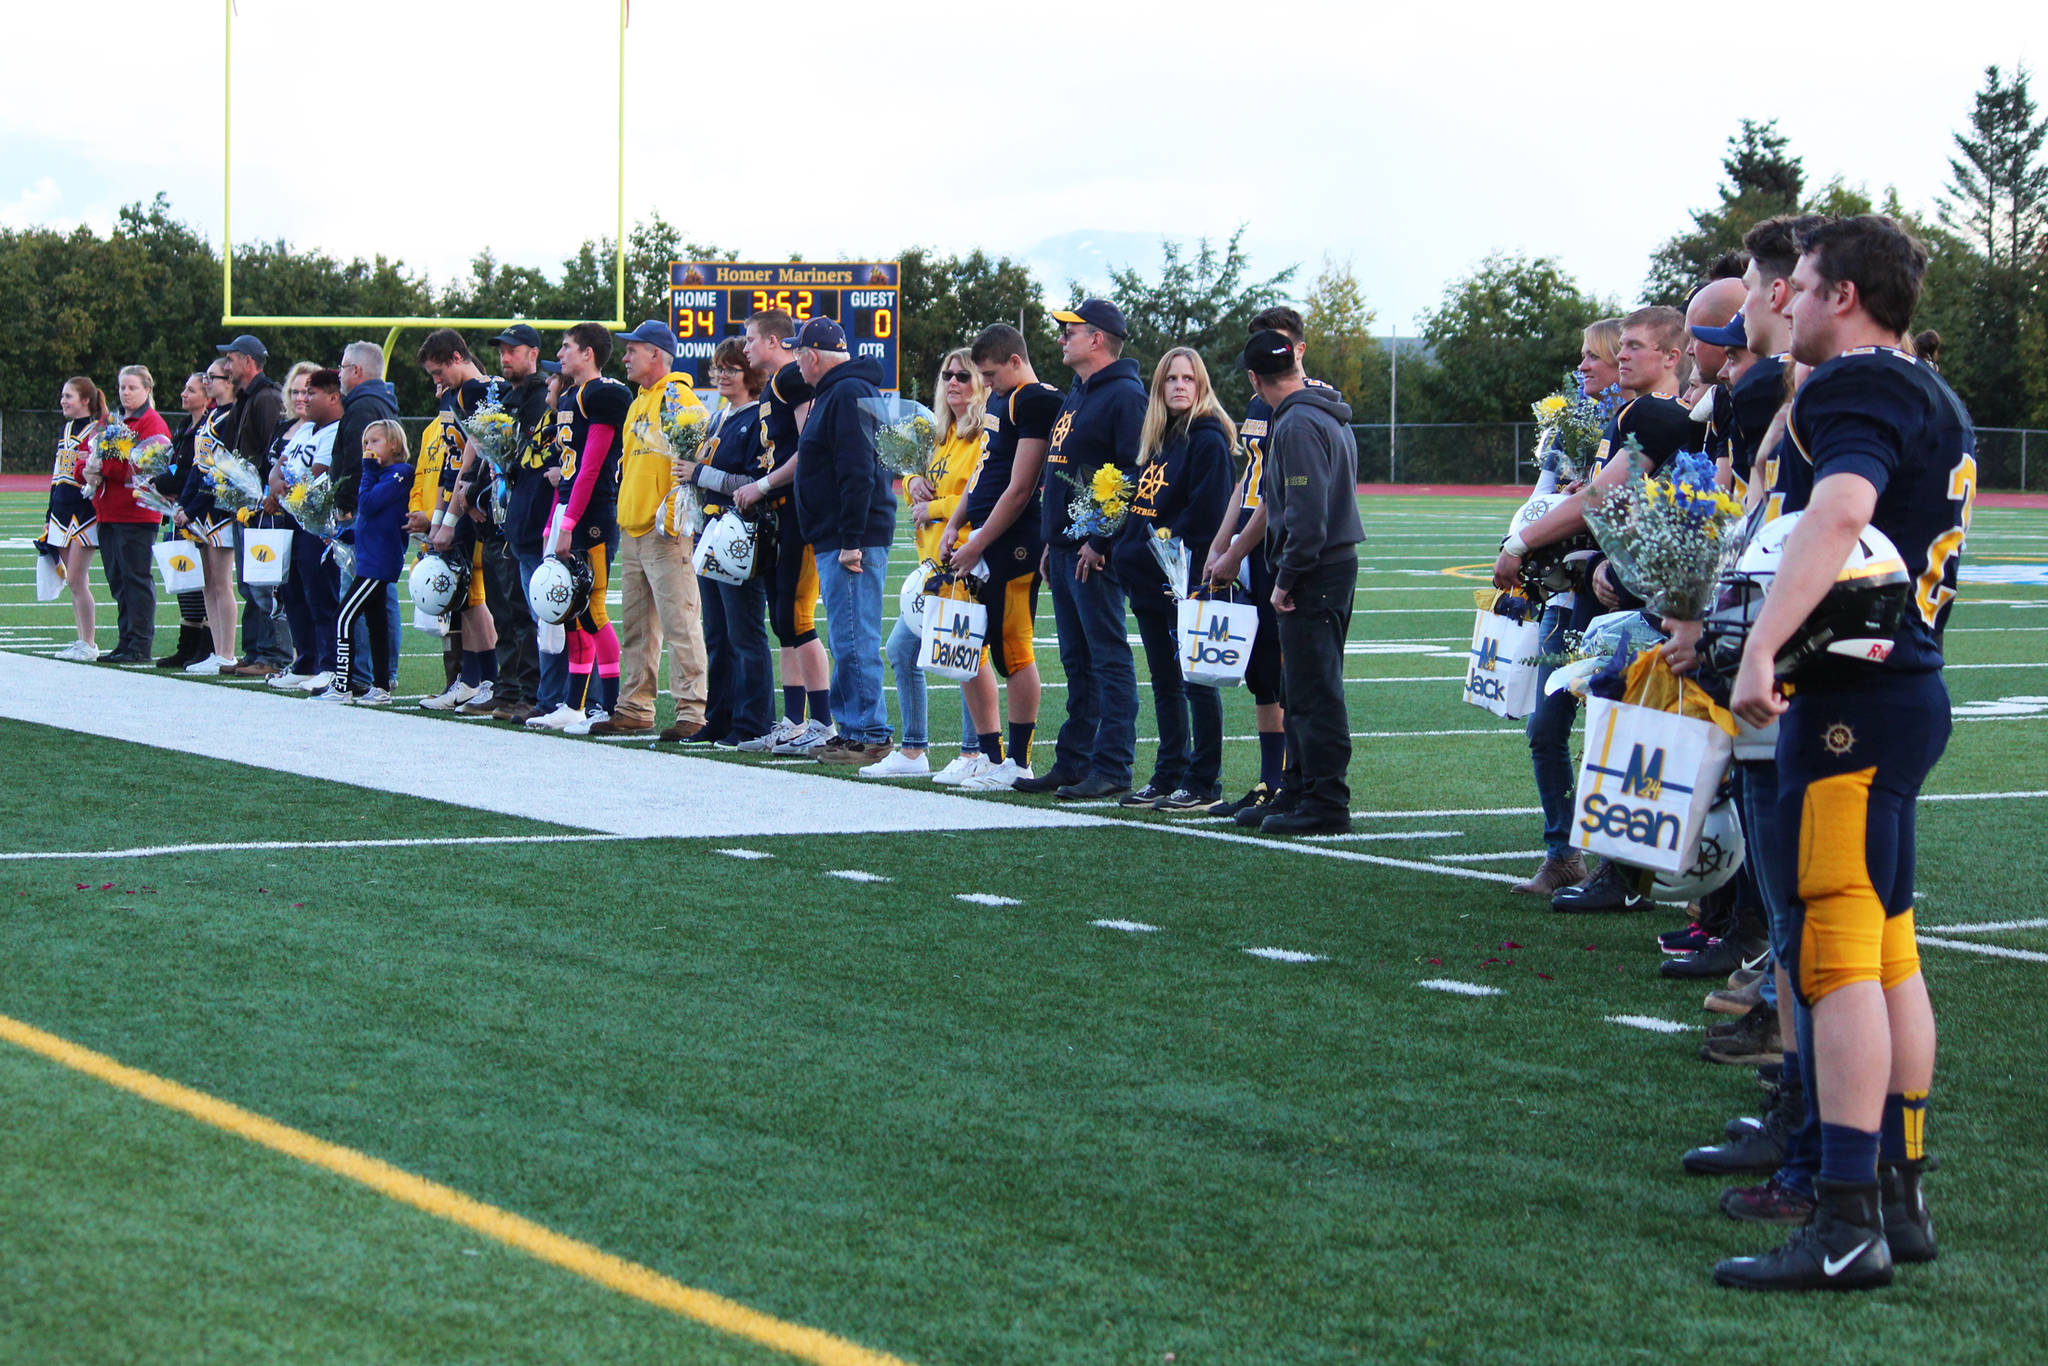 Seniors football players and cheerleaders from Homer High School stand on the field with their family members to be recognized during a senior night presentation during halftime of the game between the Mariners and the Head of the Bay Cougars on Friday, Sept. 29, 2017 at the Mariner field in Homer, Alaska. (Photo by Megan Pacer/Homer News)